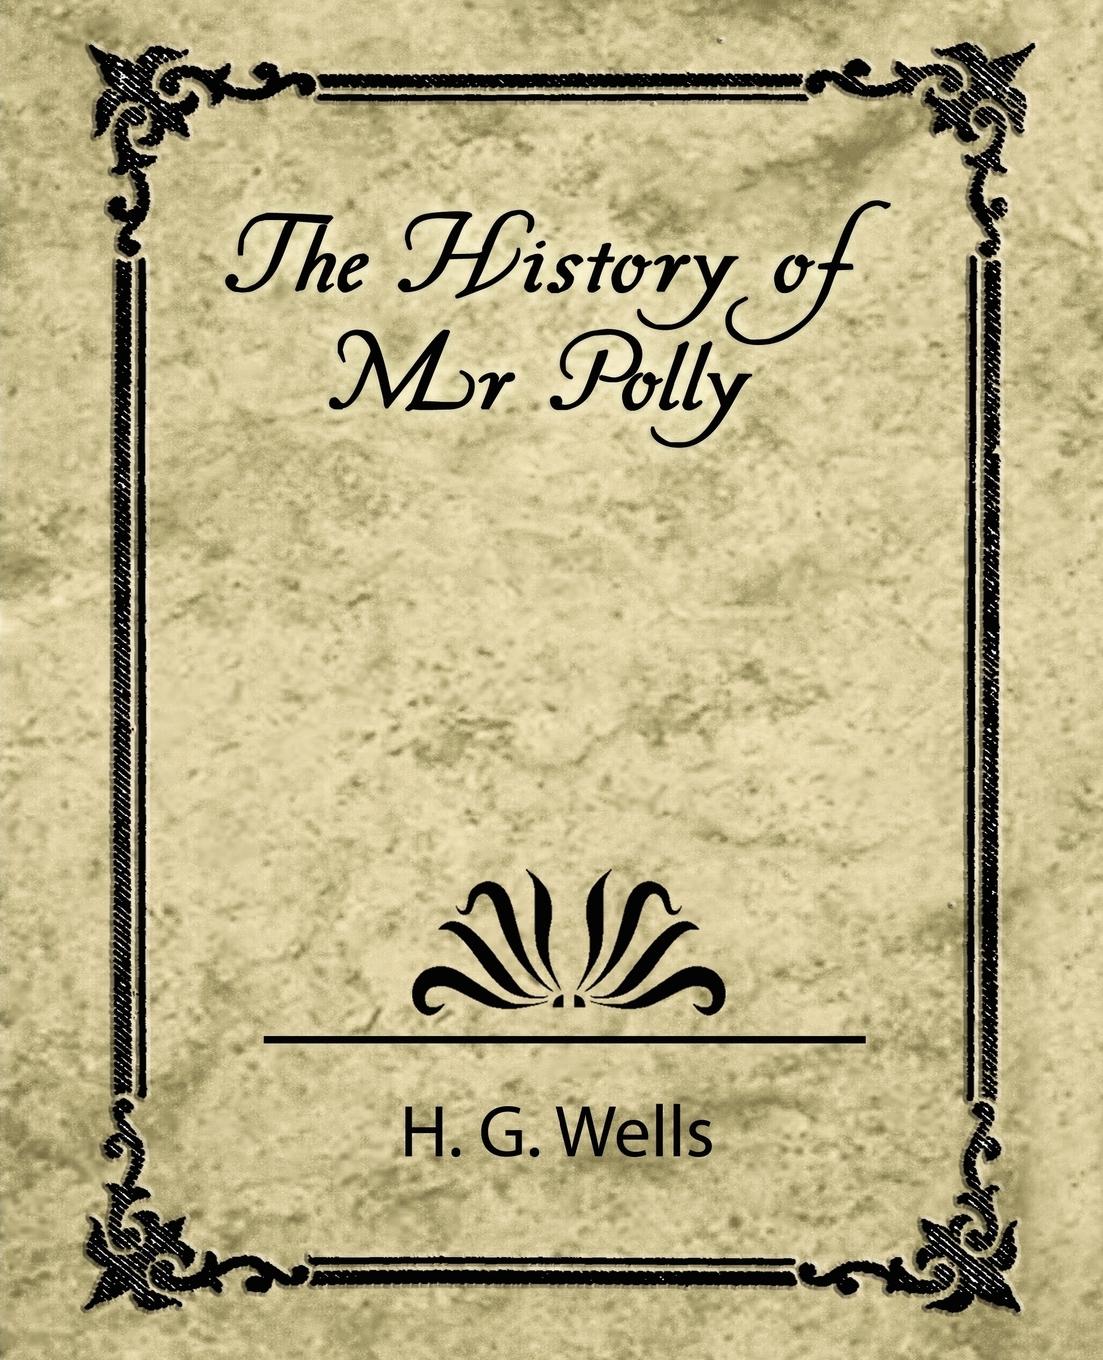 The History of Mr. Polly - H. G. Wells, G. Wells|H. G. Wells